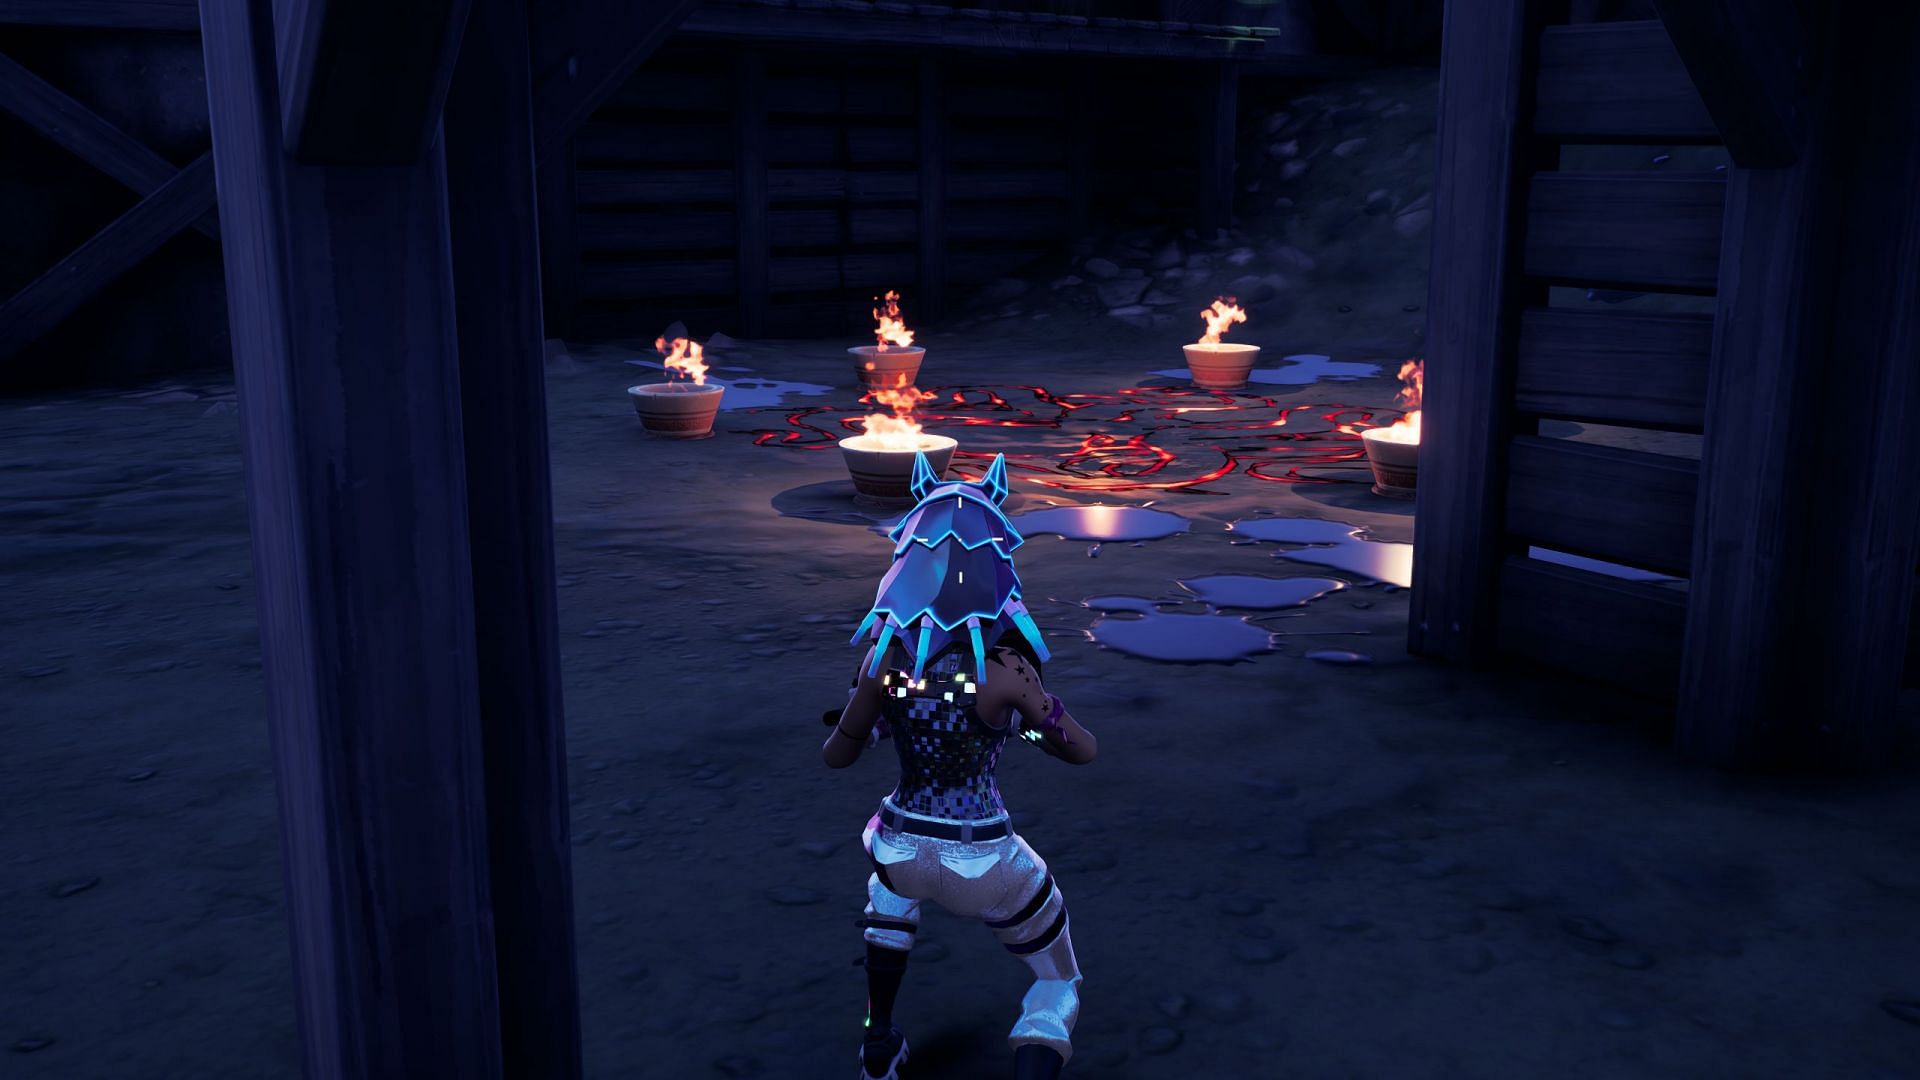 To obtain the Mythic SMG, you will have to summon the boss (Image via Epic Games)